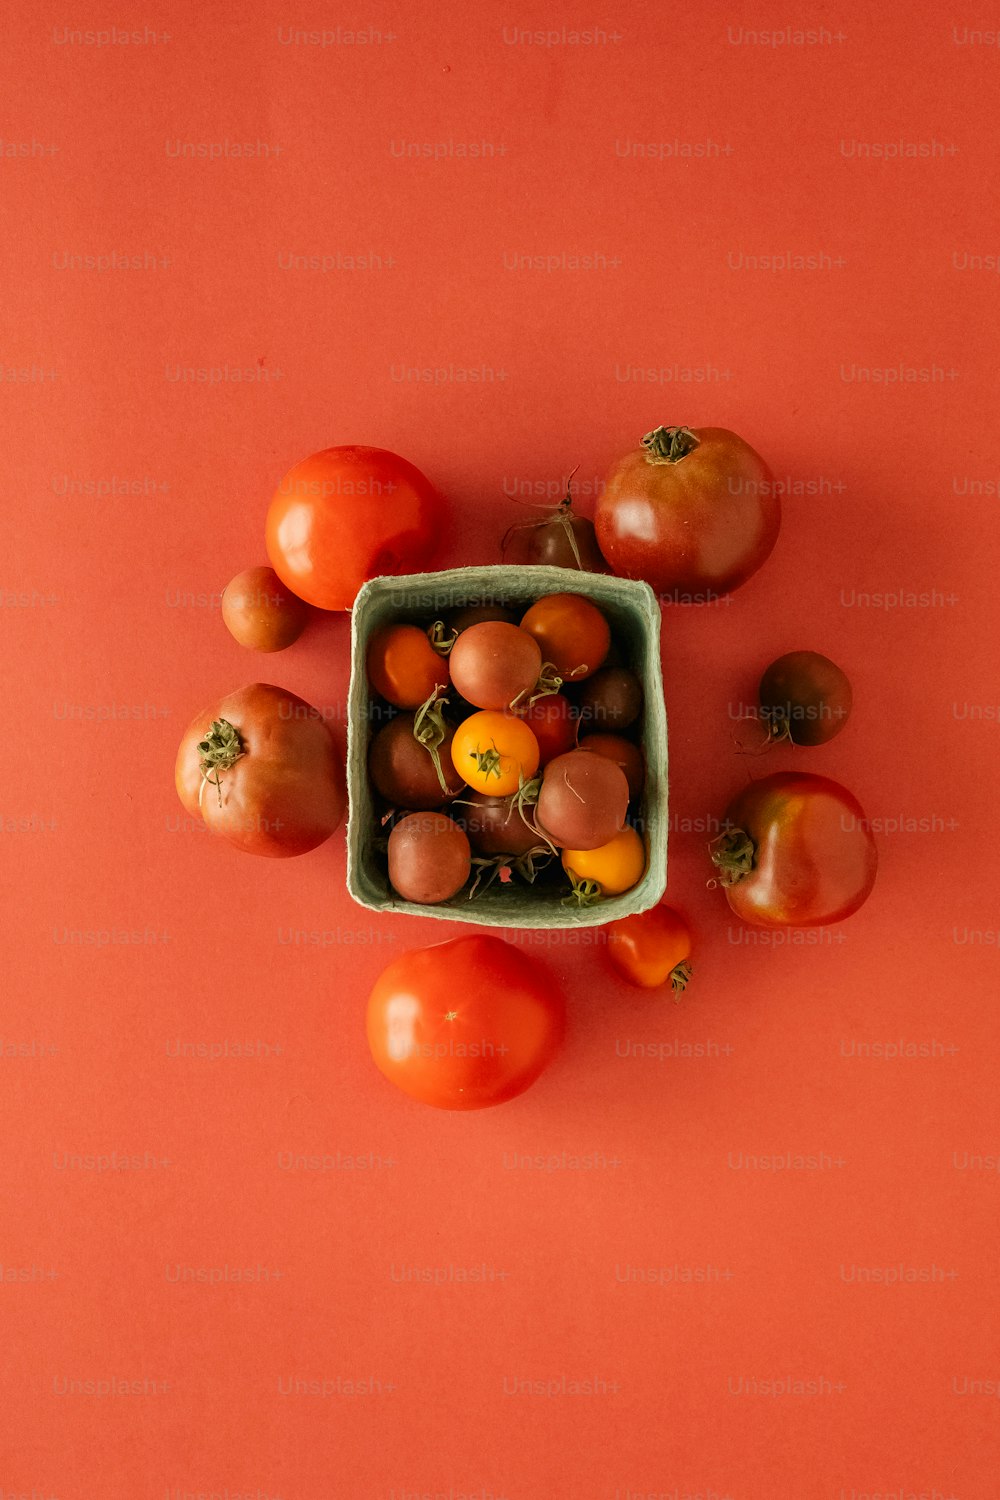 a bowl of tomatoes on a red surface